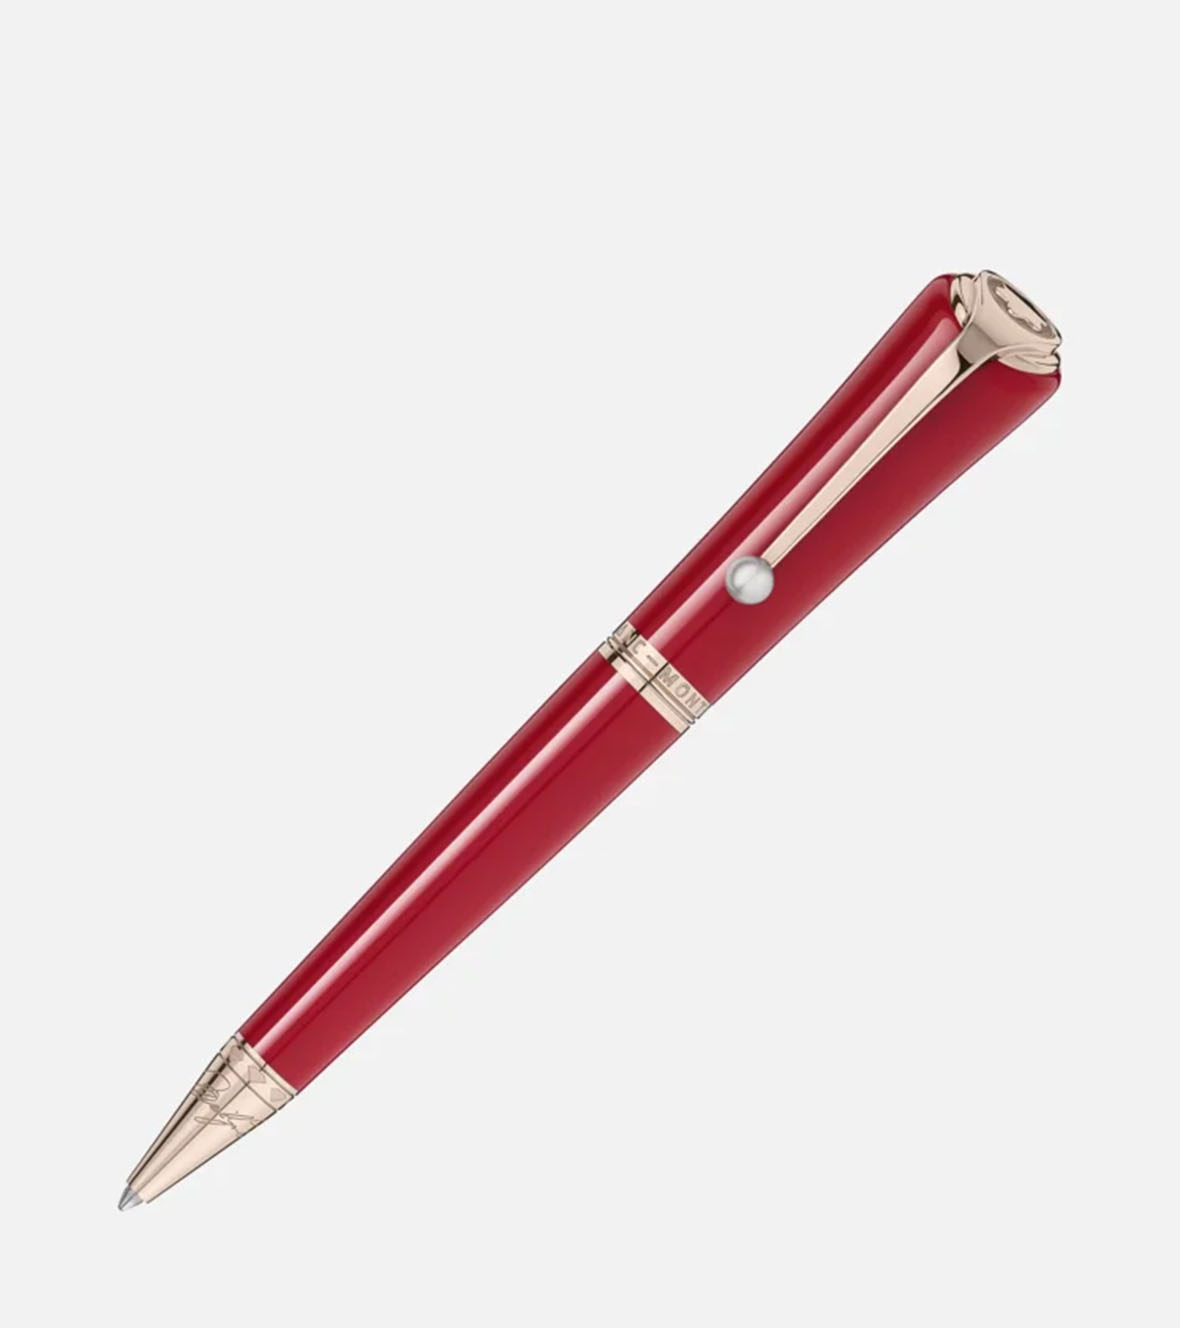 Montblanc Muses Marilyn Monroe Special Edition Ballpoint Pen 116068